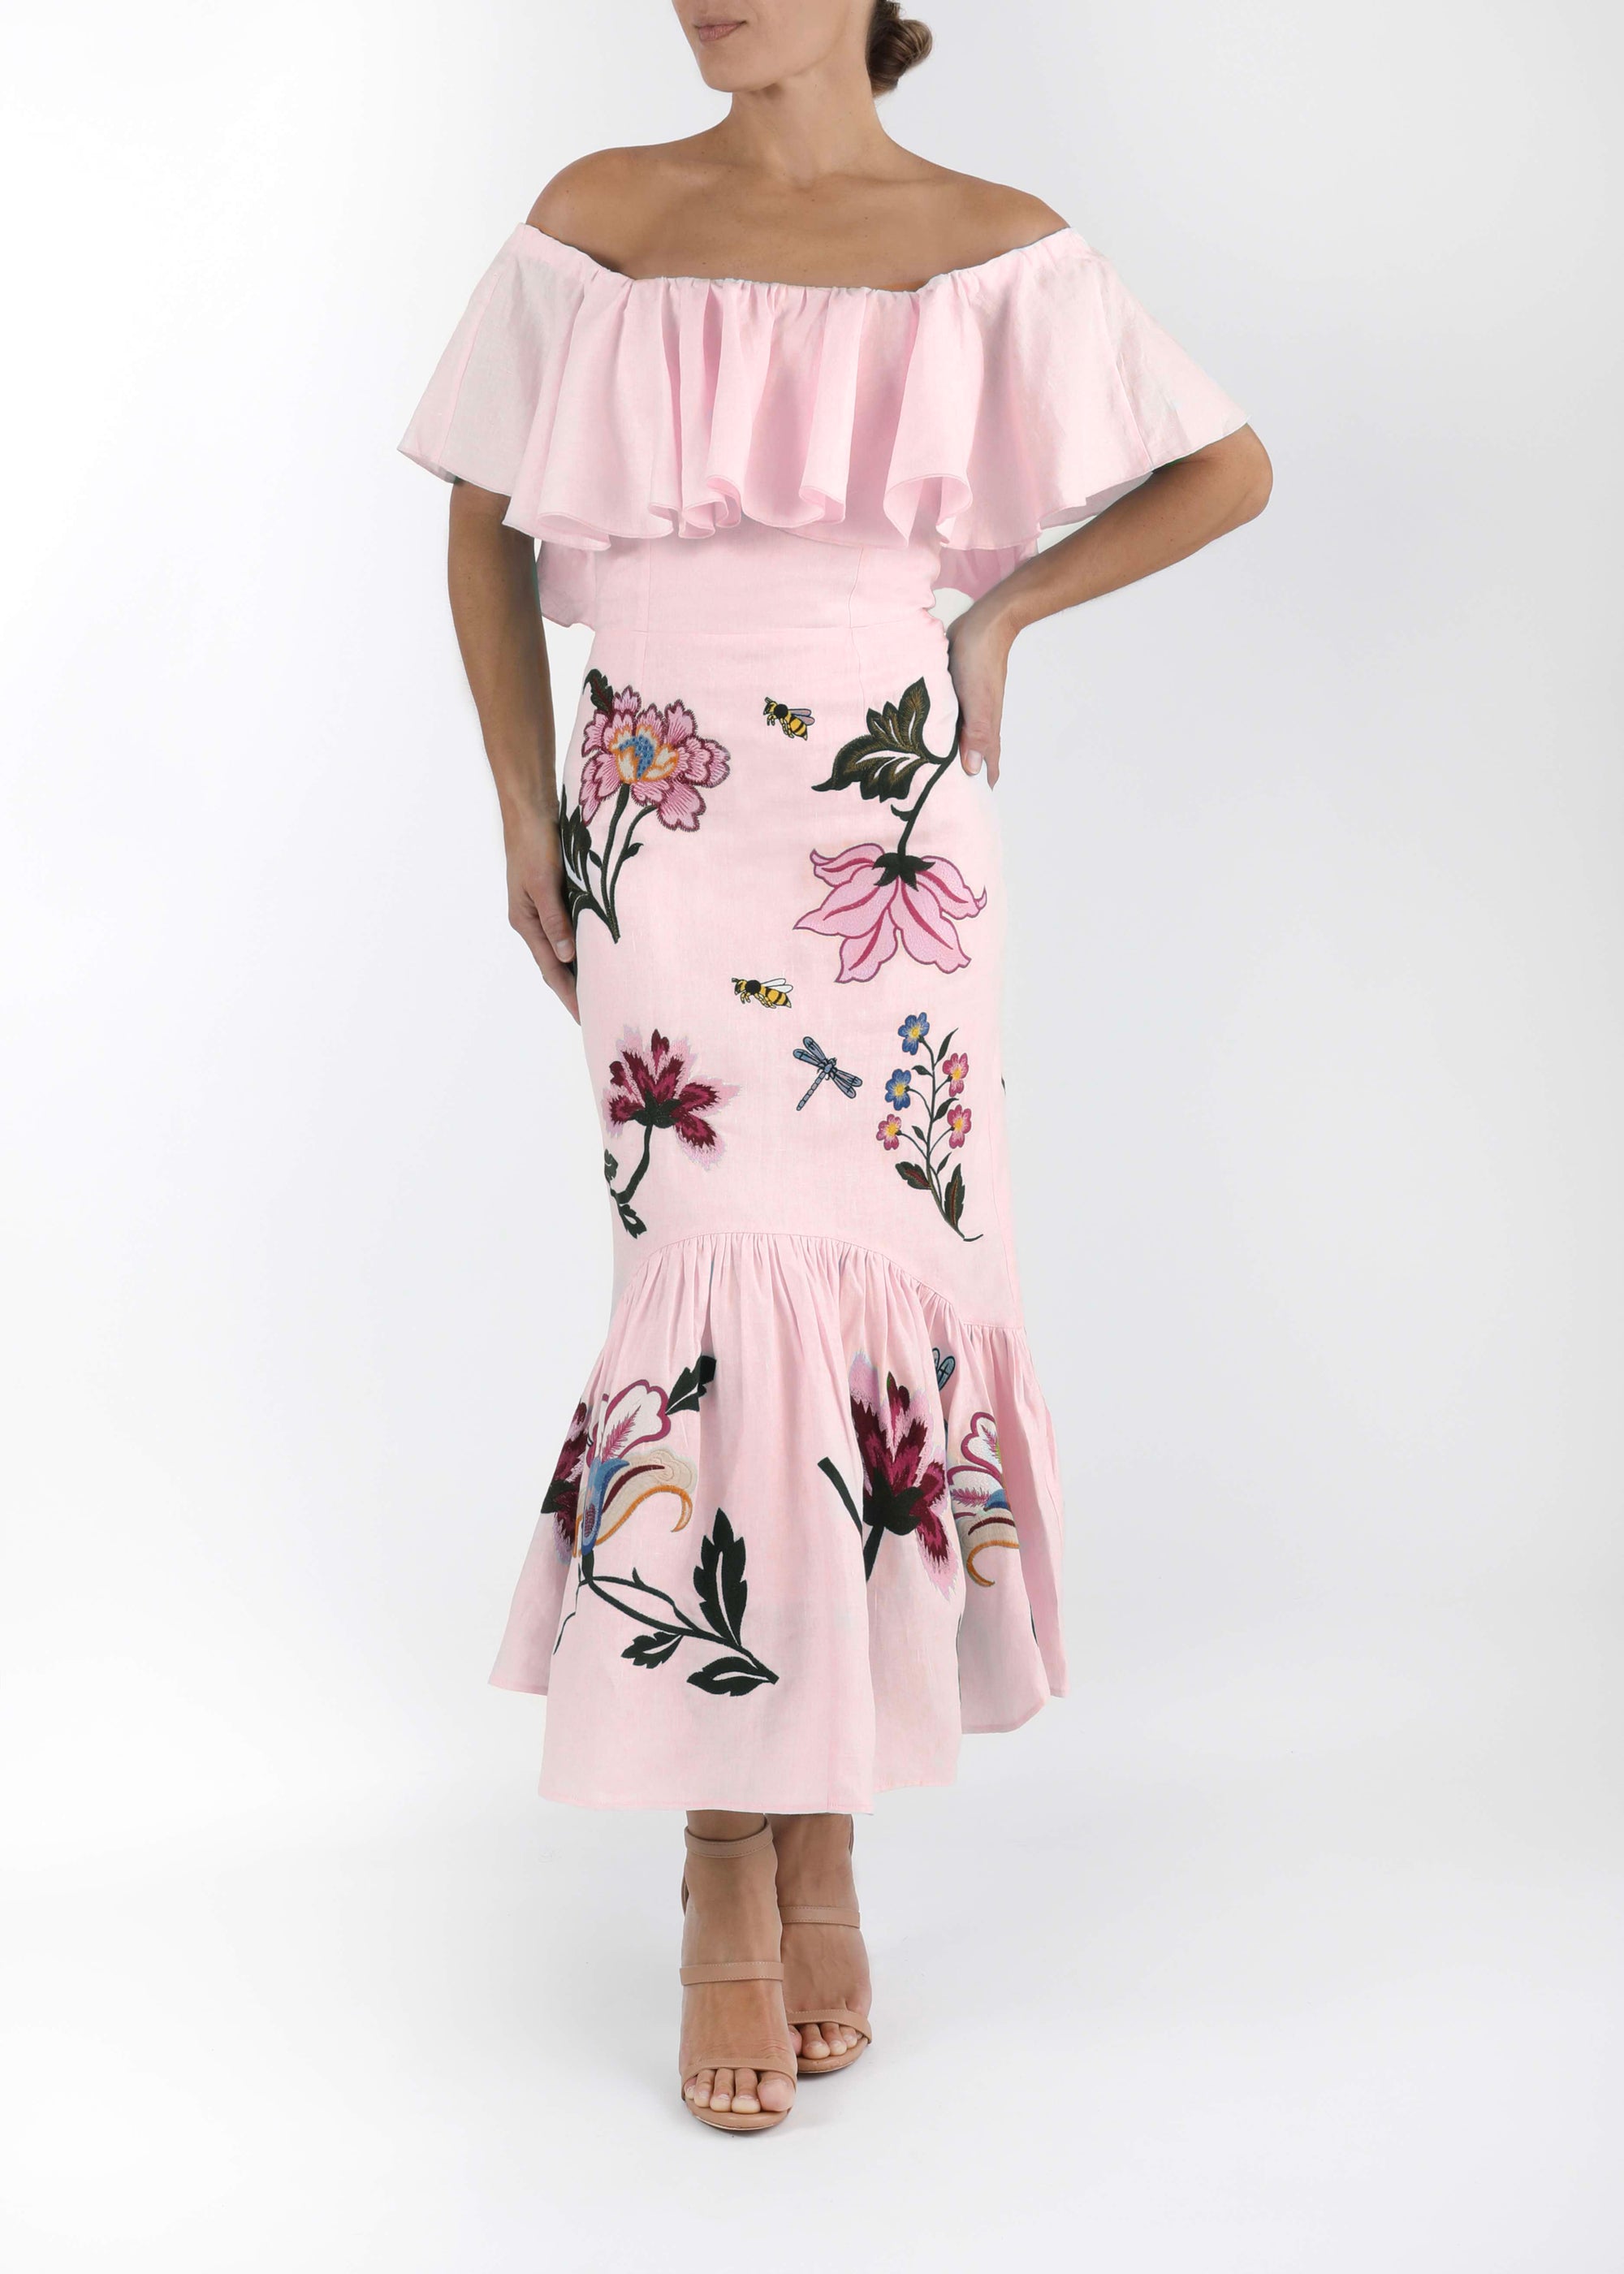 Fanm Mon and Over The Moon Clarissa Midi Dress in Light Pink